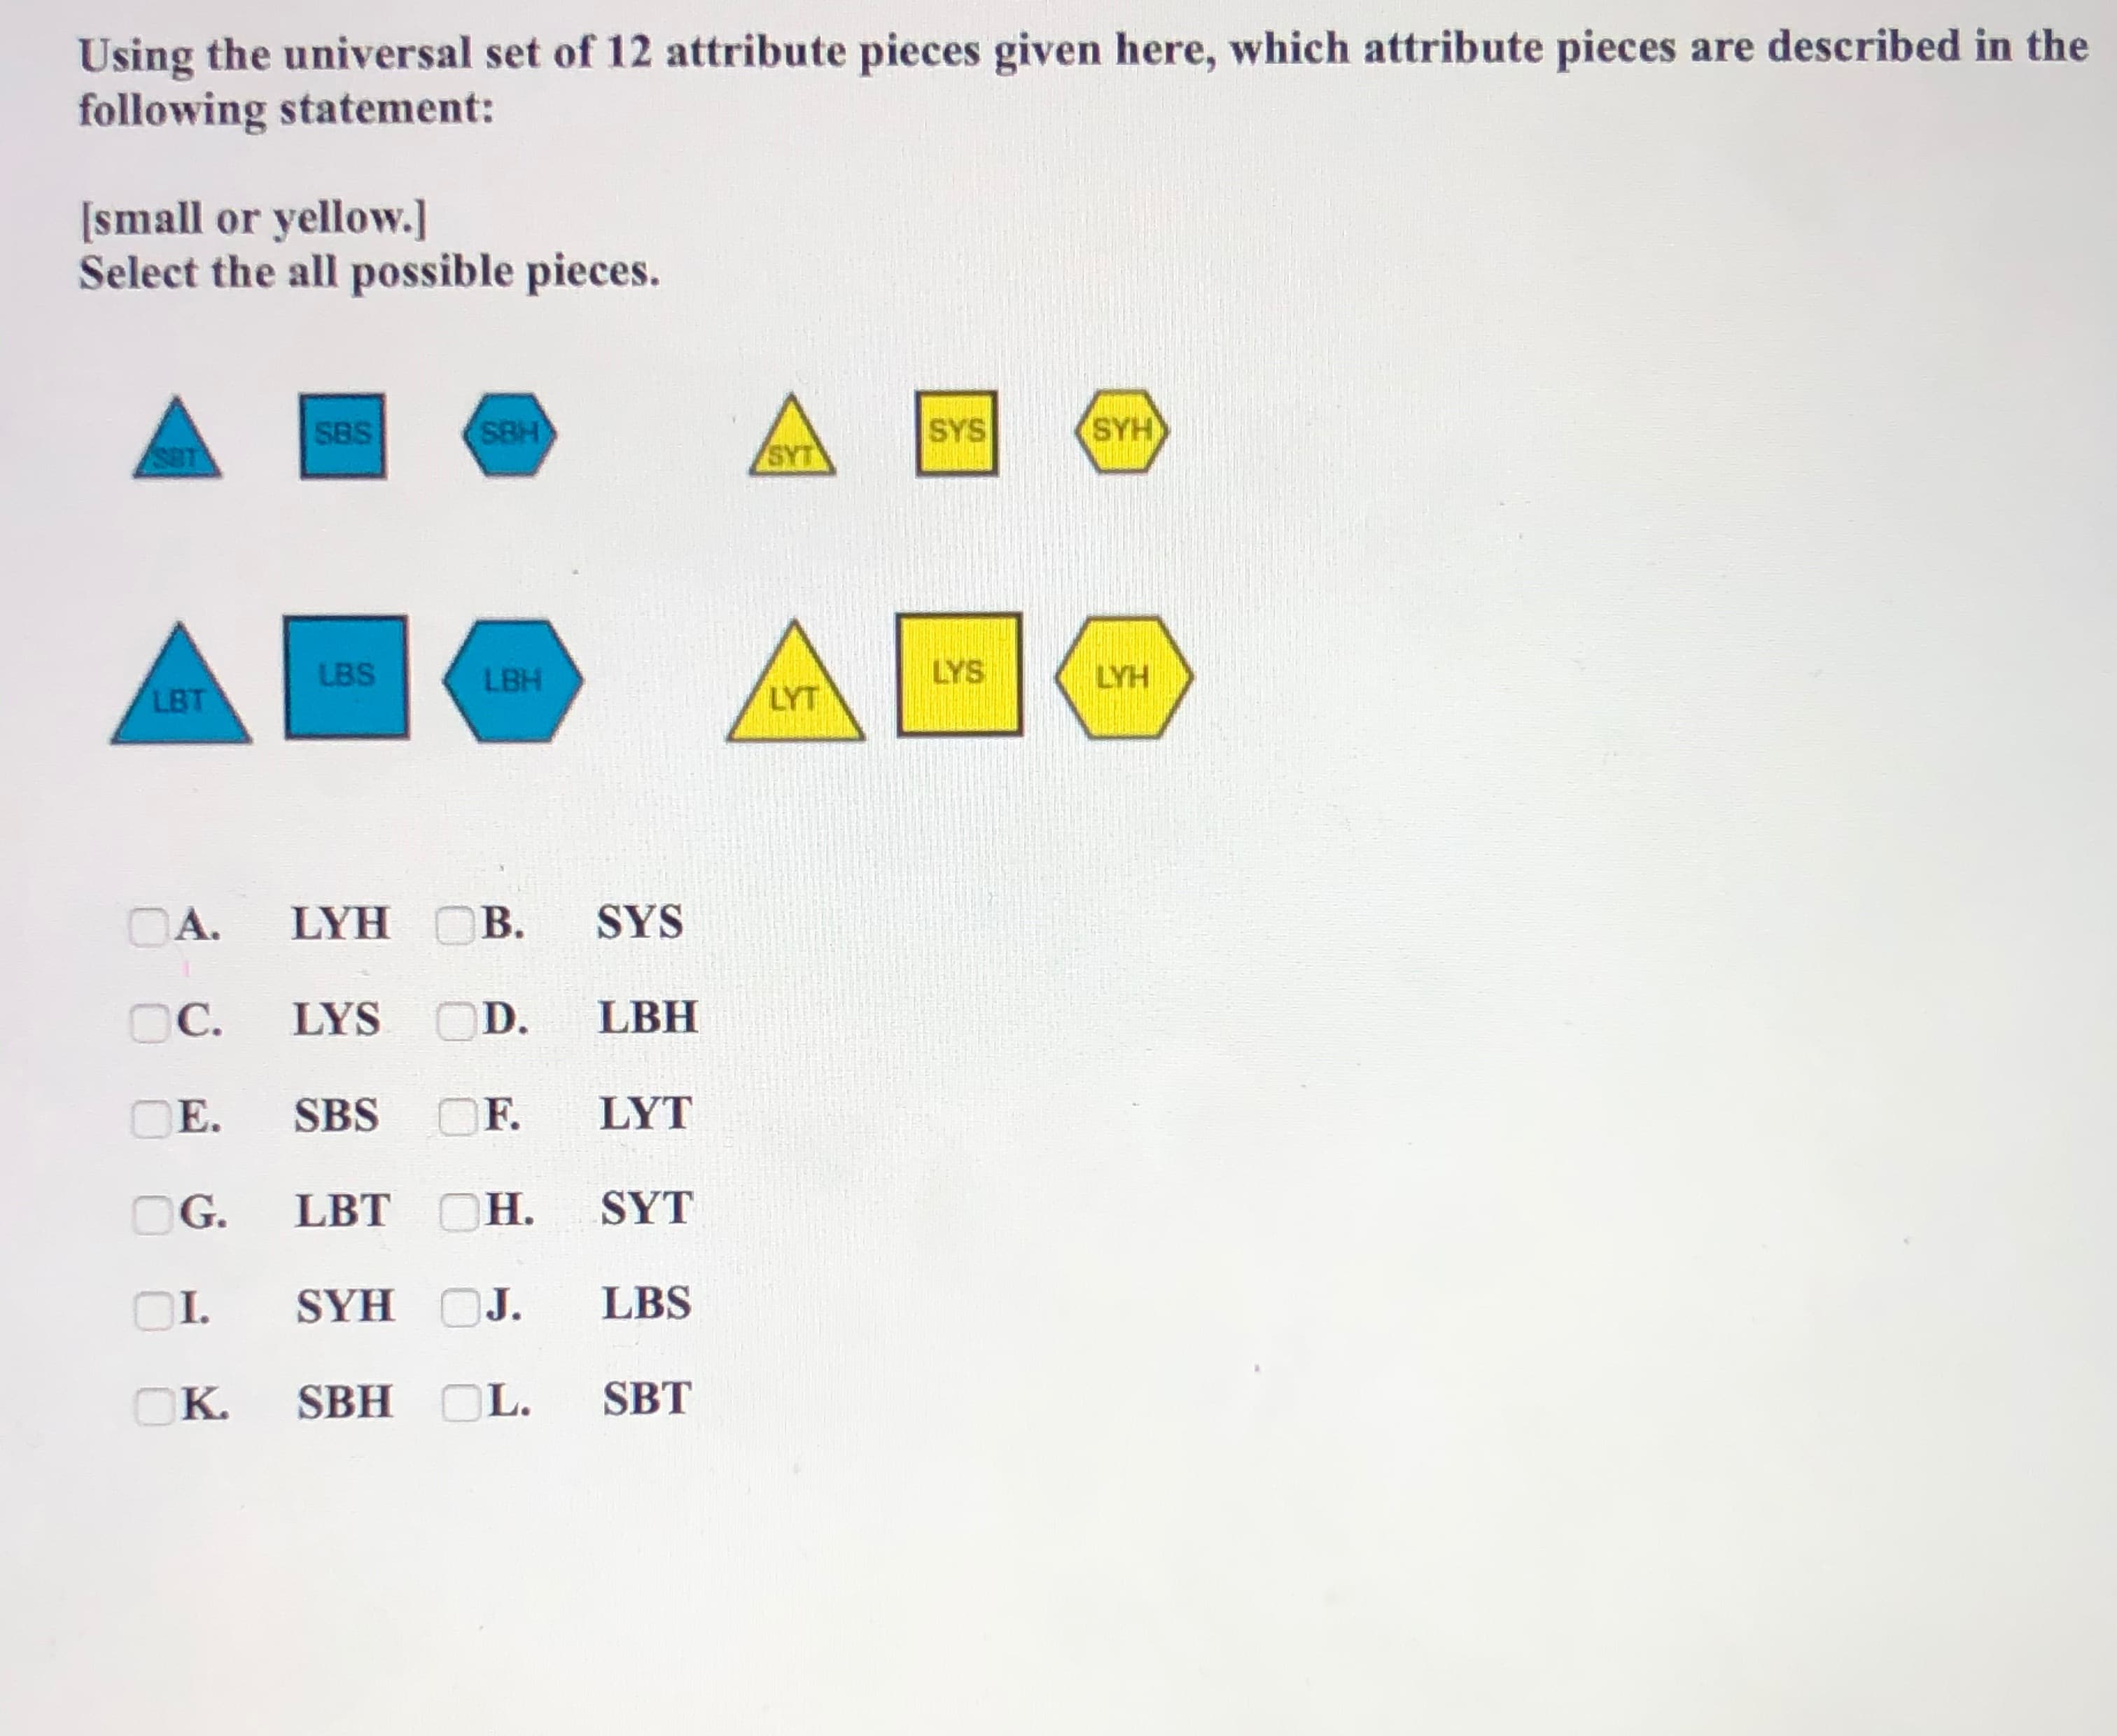 Using the universal set of 12 attribute pieces given here, which attribute pieces are described in the
following statement:
[small or yellow.]
Select the all possible pieces.
SBS
SBH
SYS
SYH
SBT
SYT
LBS
LBH
LYS
LYH
LBT
LYT
OA. LYH OB.
SYS
OC.
LYS OD.
LBH
OE.
SBS
OF.
LYT
G.
LBT OH.
SYT
OI.
SYH OJ.
LBS
OK. SBH OL.
SBT
